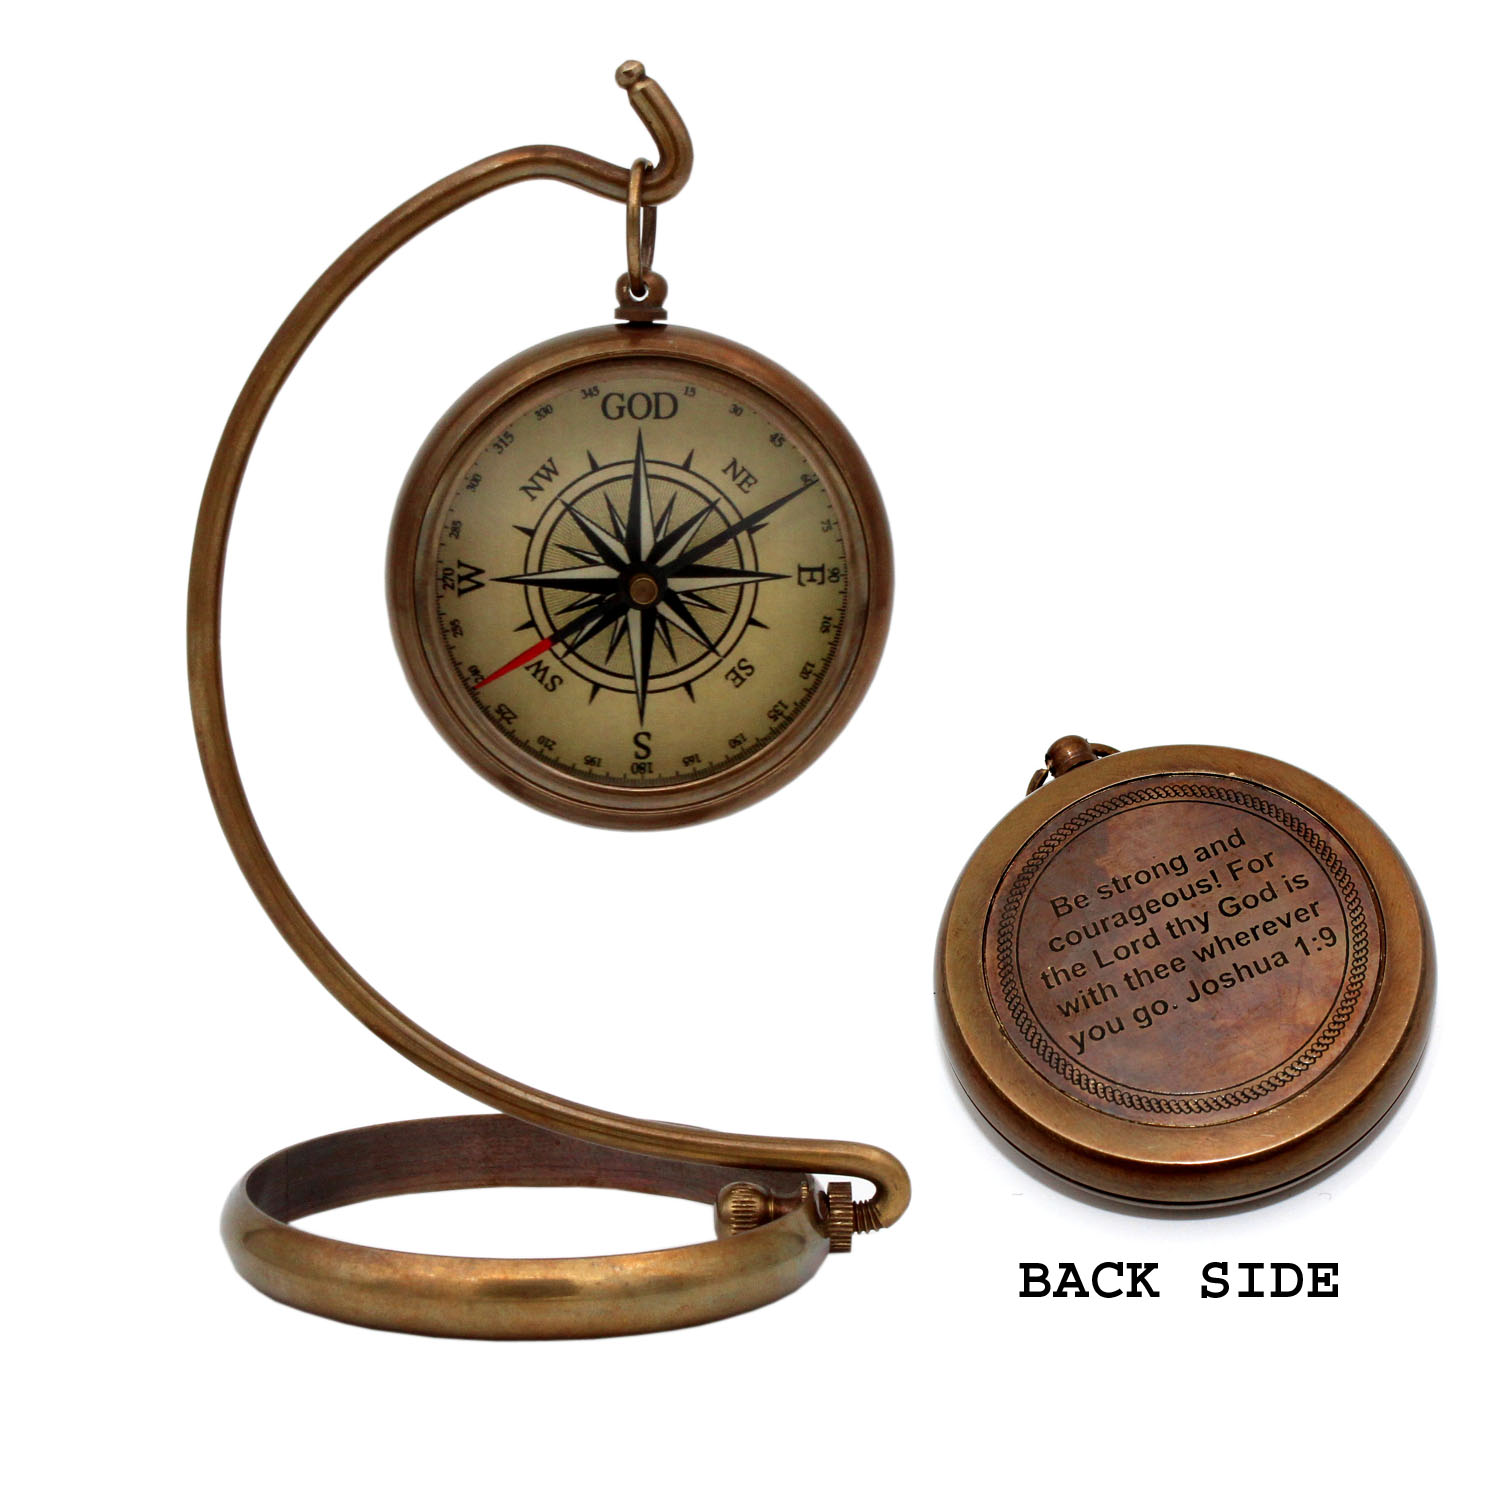 Engraved Compass Case Brass Antique Pocket Compass '' Be Strong and Courageous 